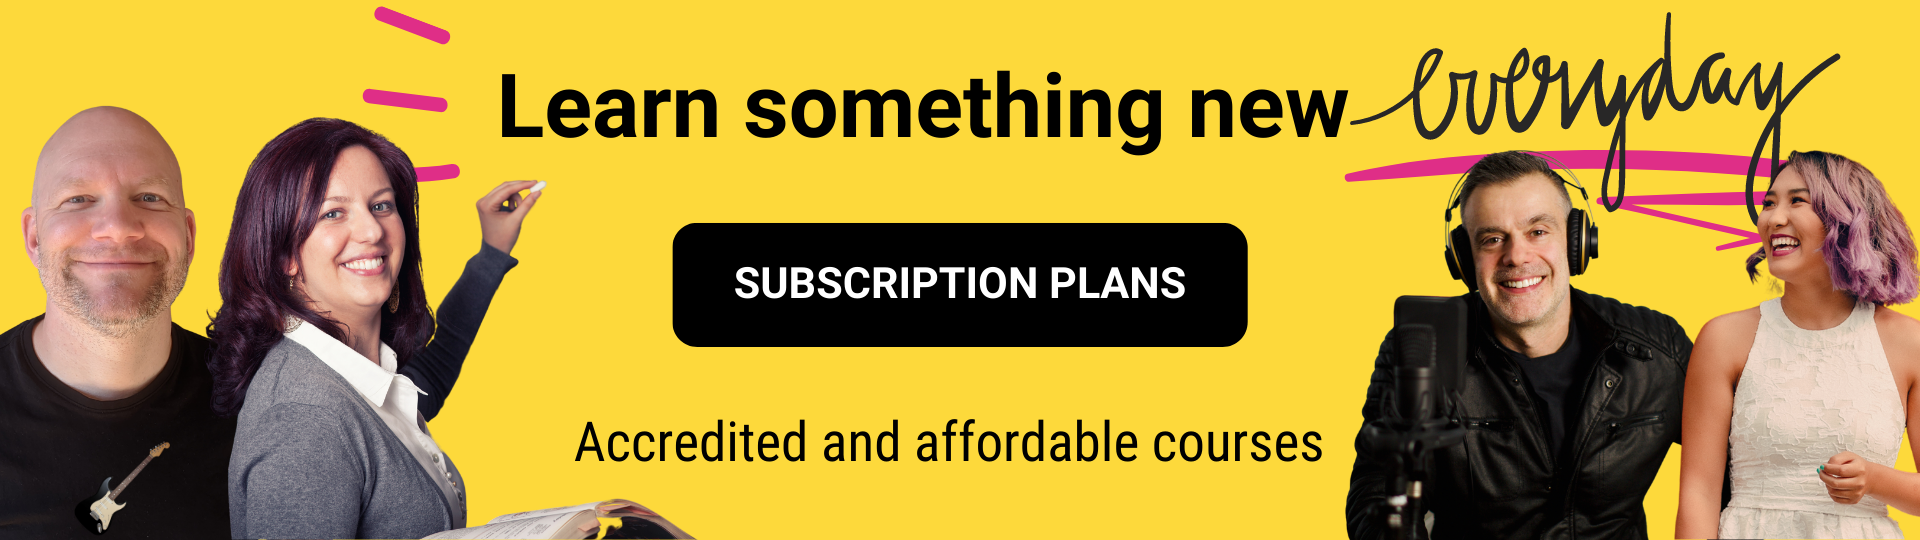 Subscribe to All Courses